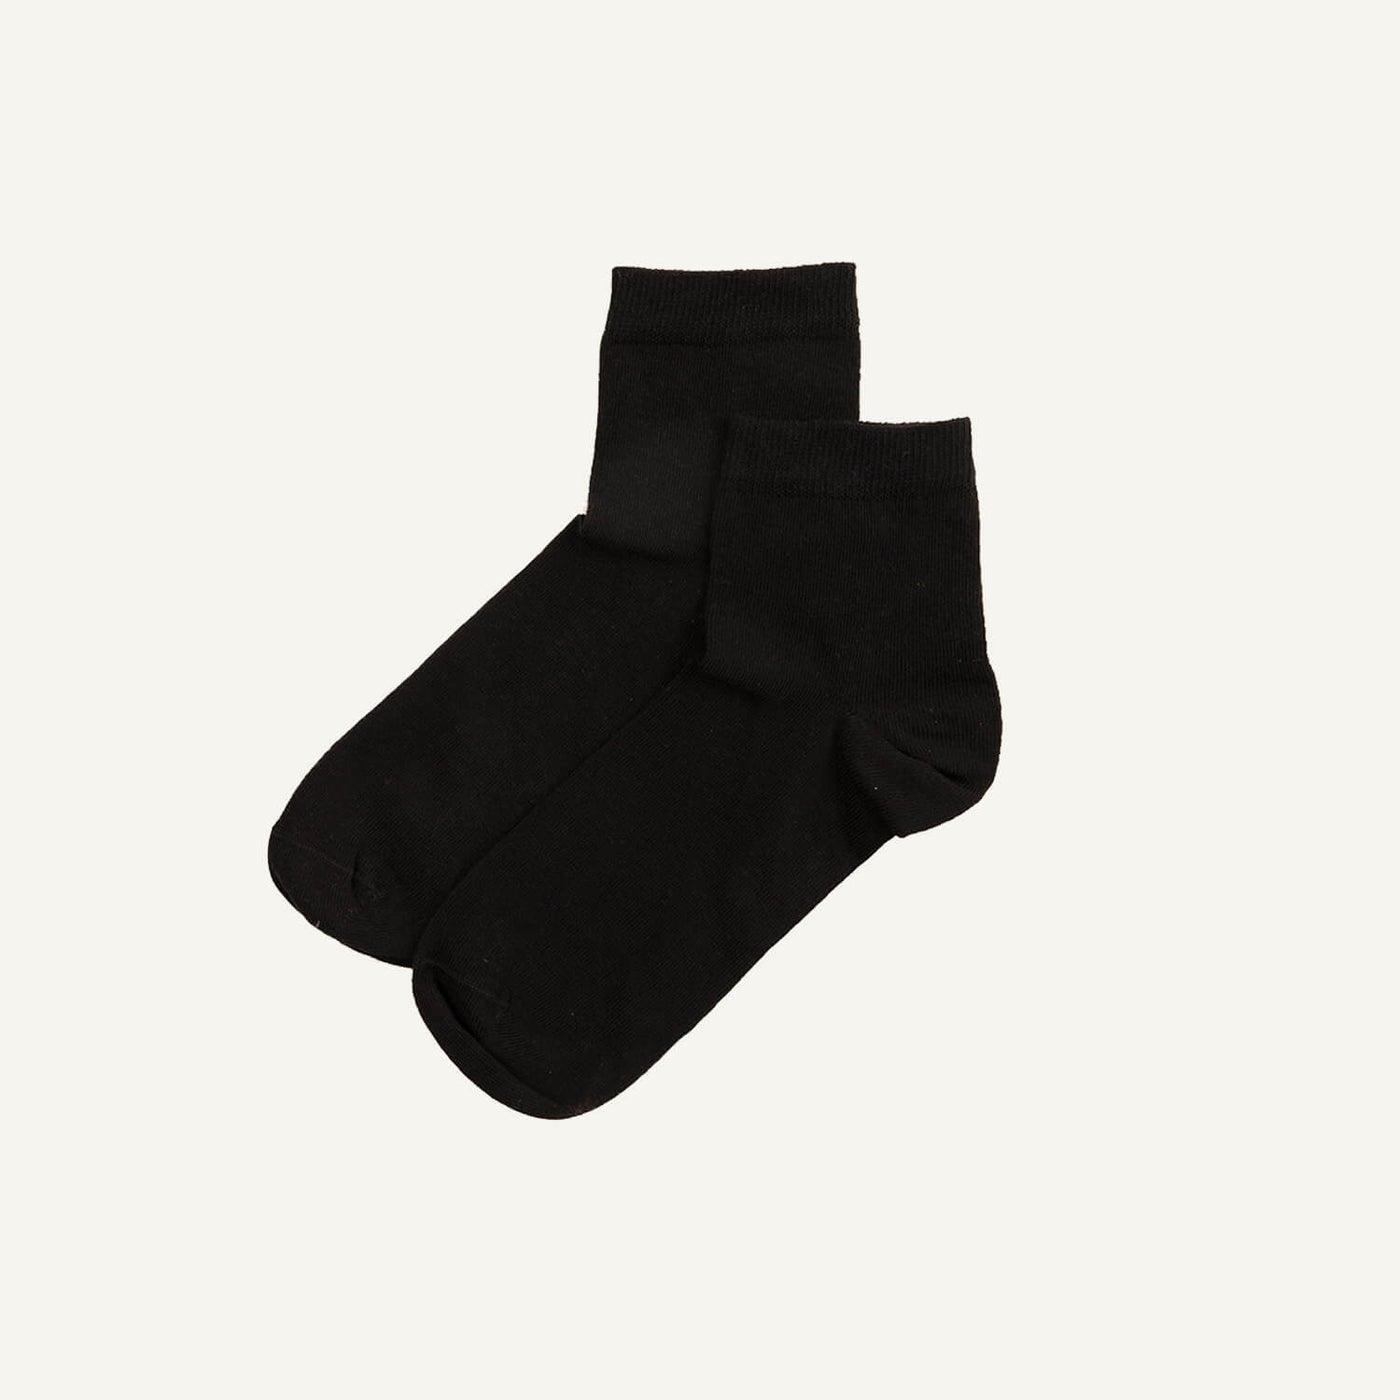 Subset Organic Cotton Lightweight Quarter Sock: Available in 3 colors |  Subset